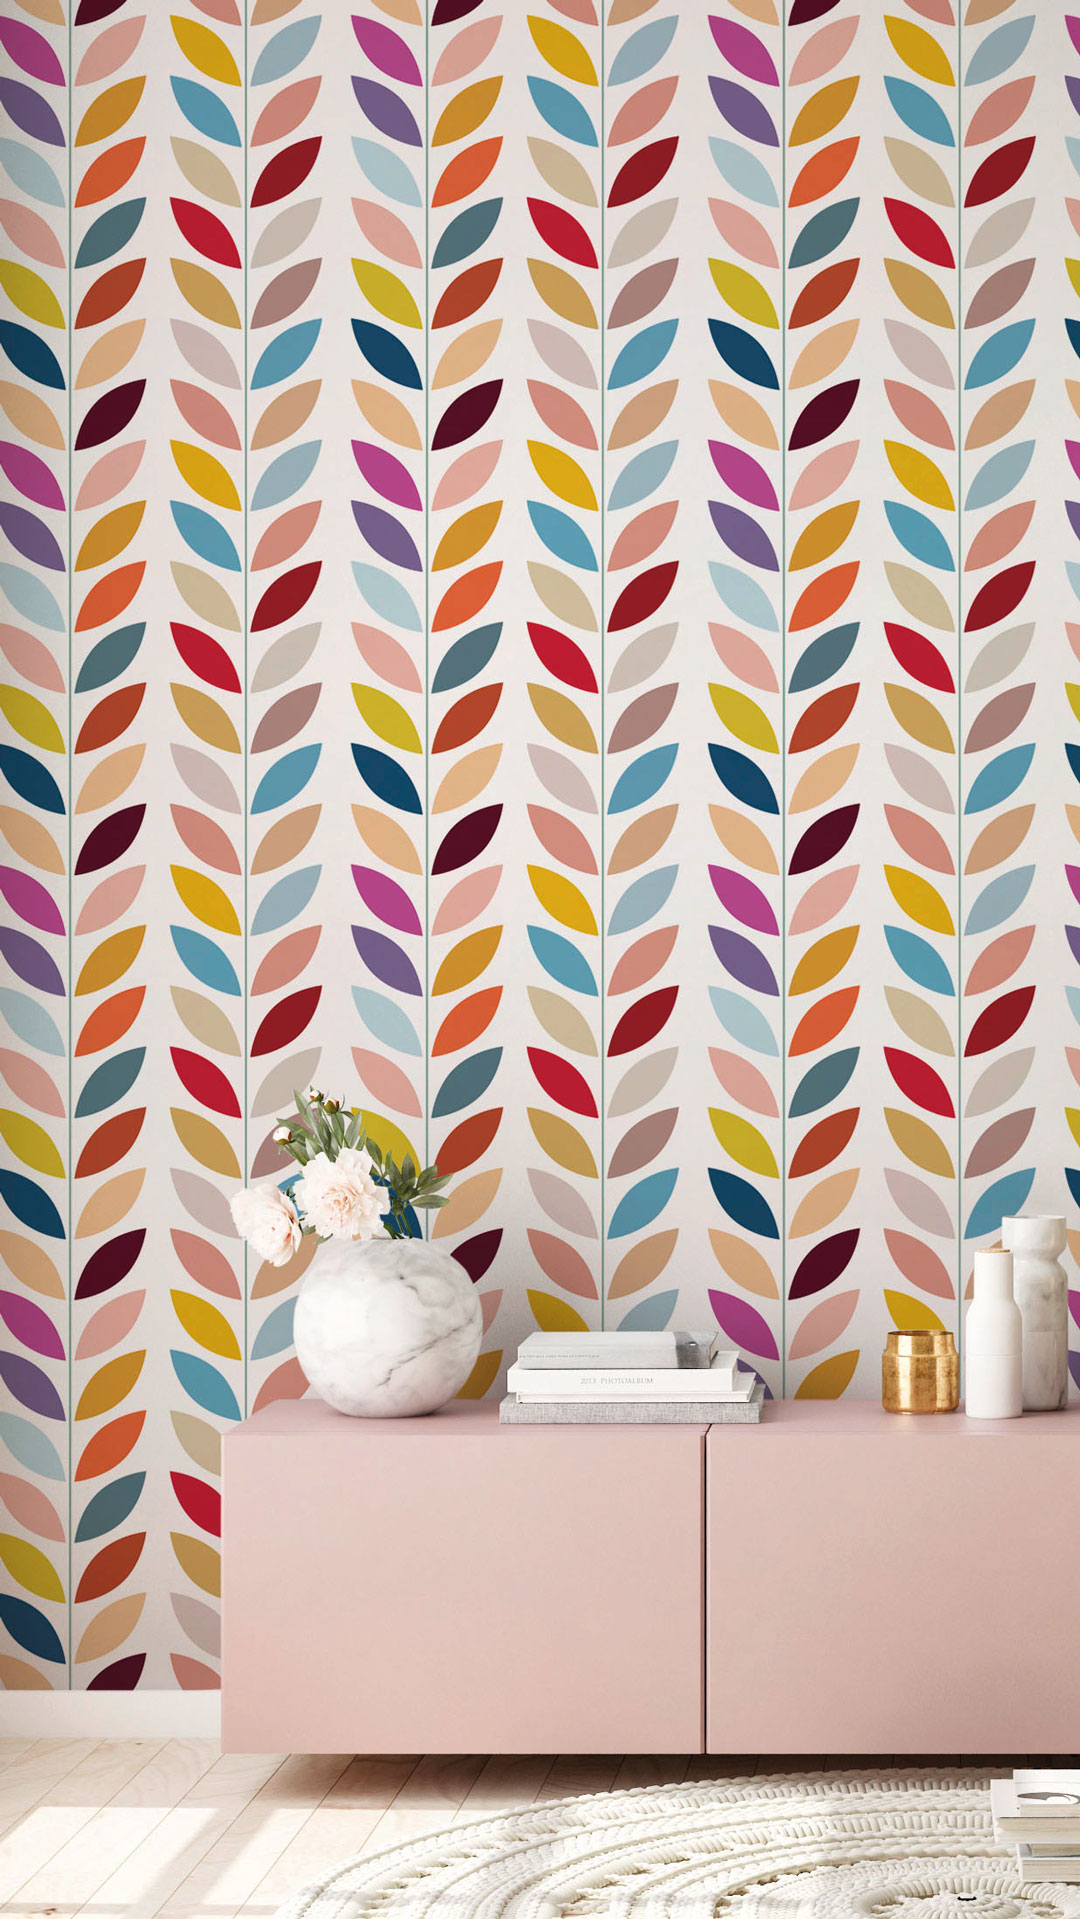 Buy wallpaper online » Feel good at home thanks to New-Walls